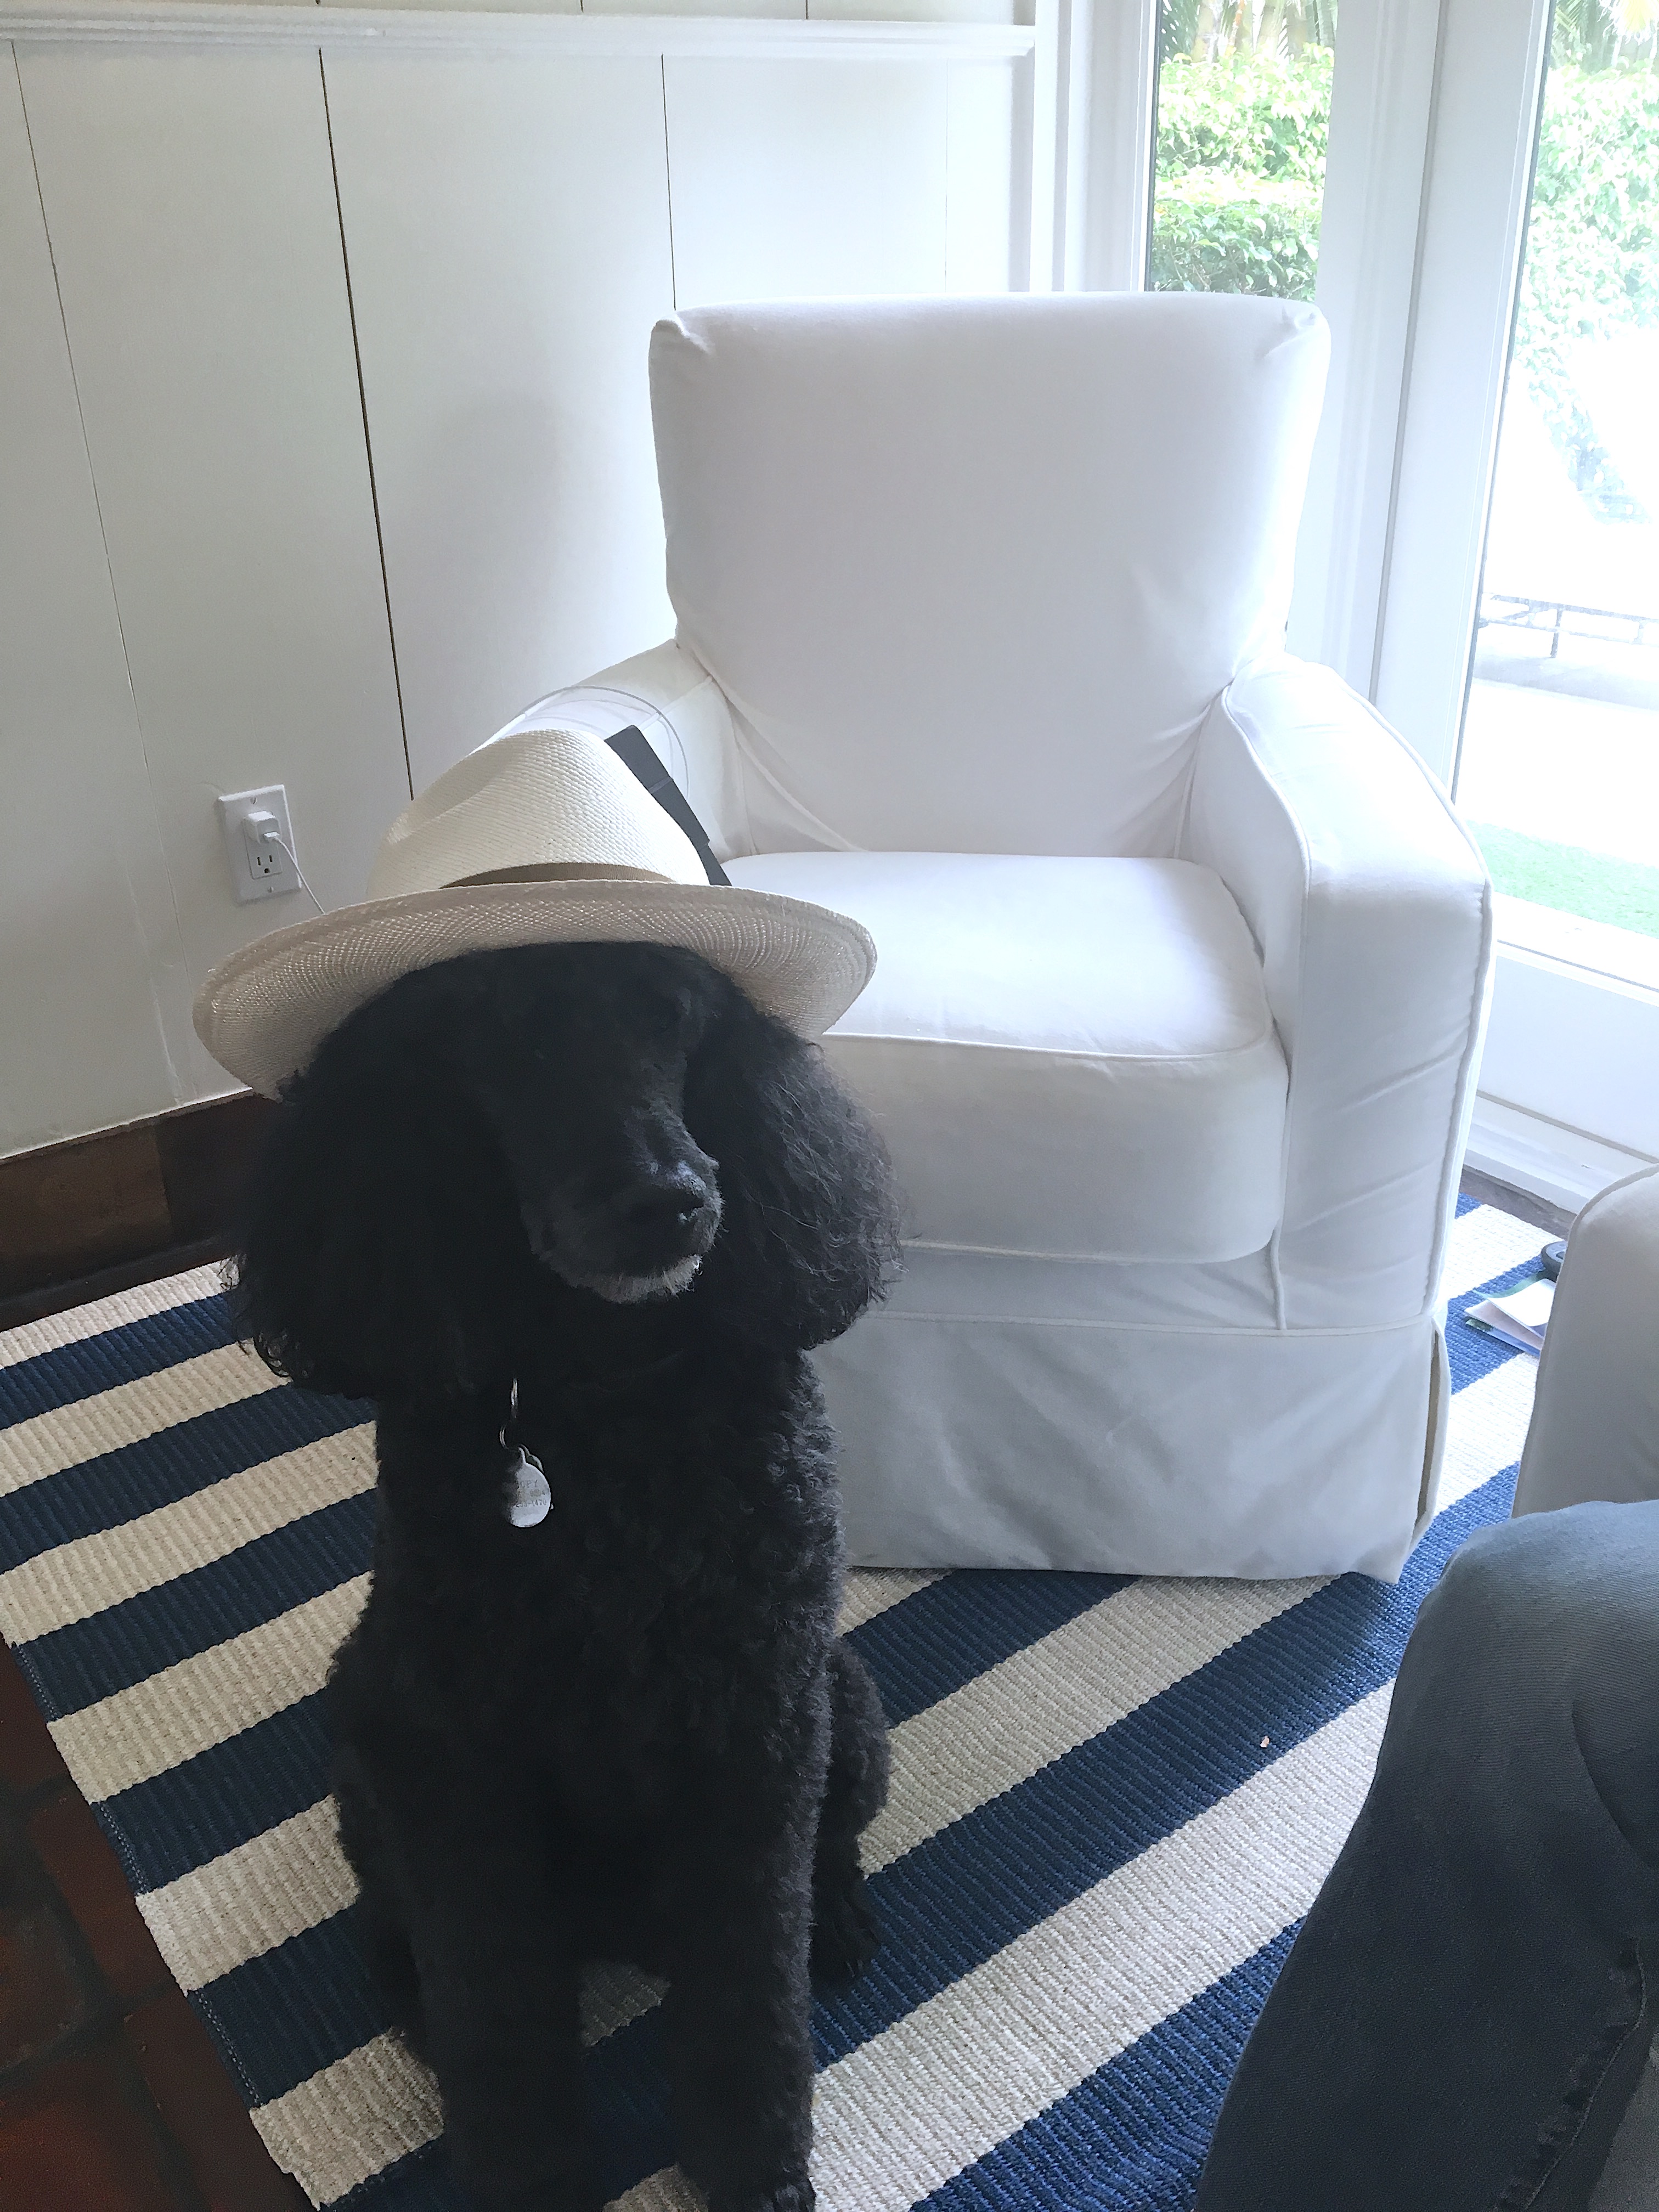 Bold, Striped Rug with Hat-Clad Poodle